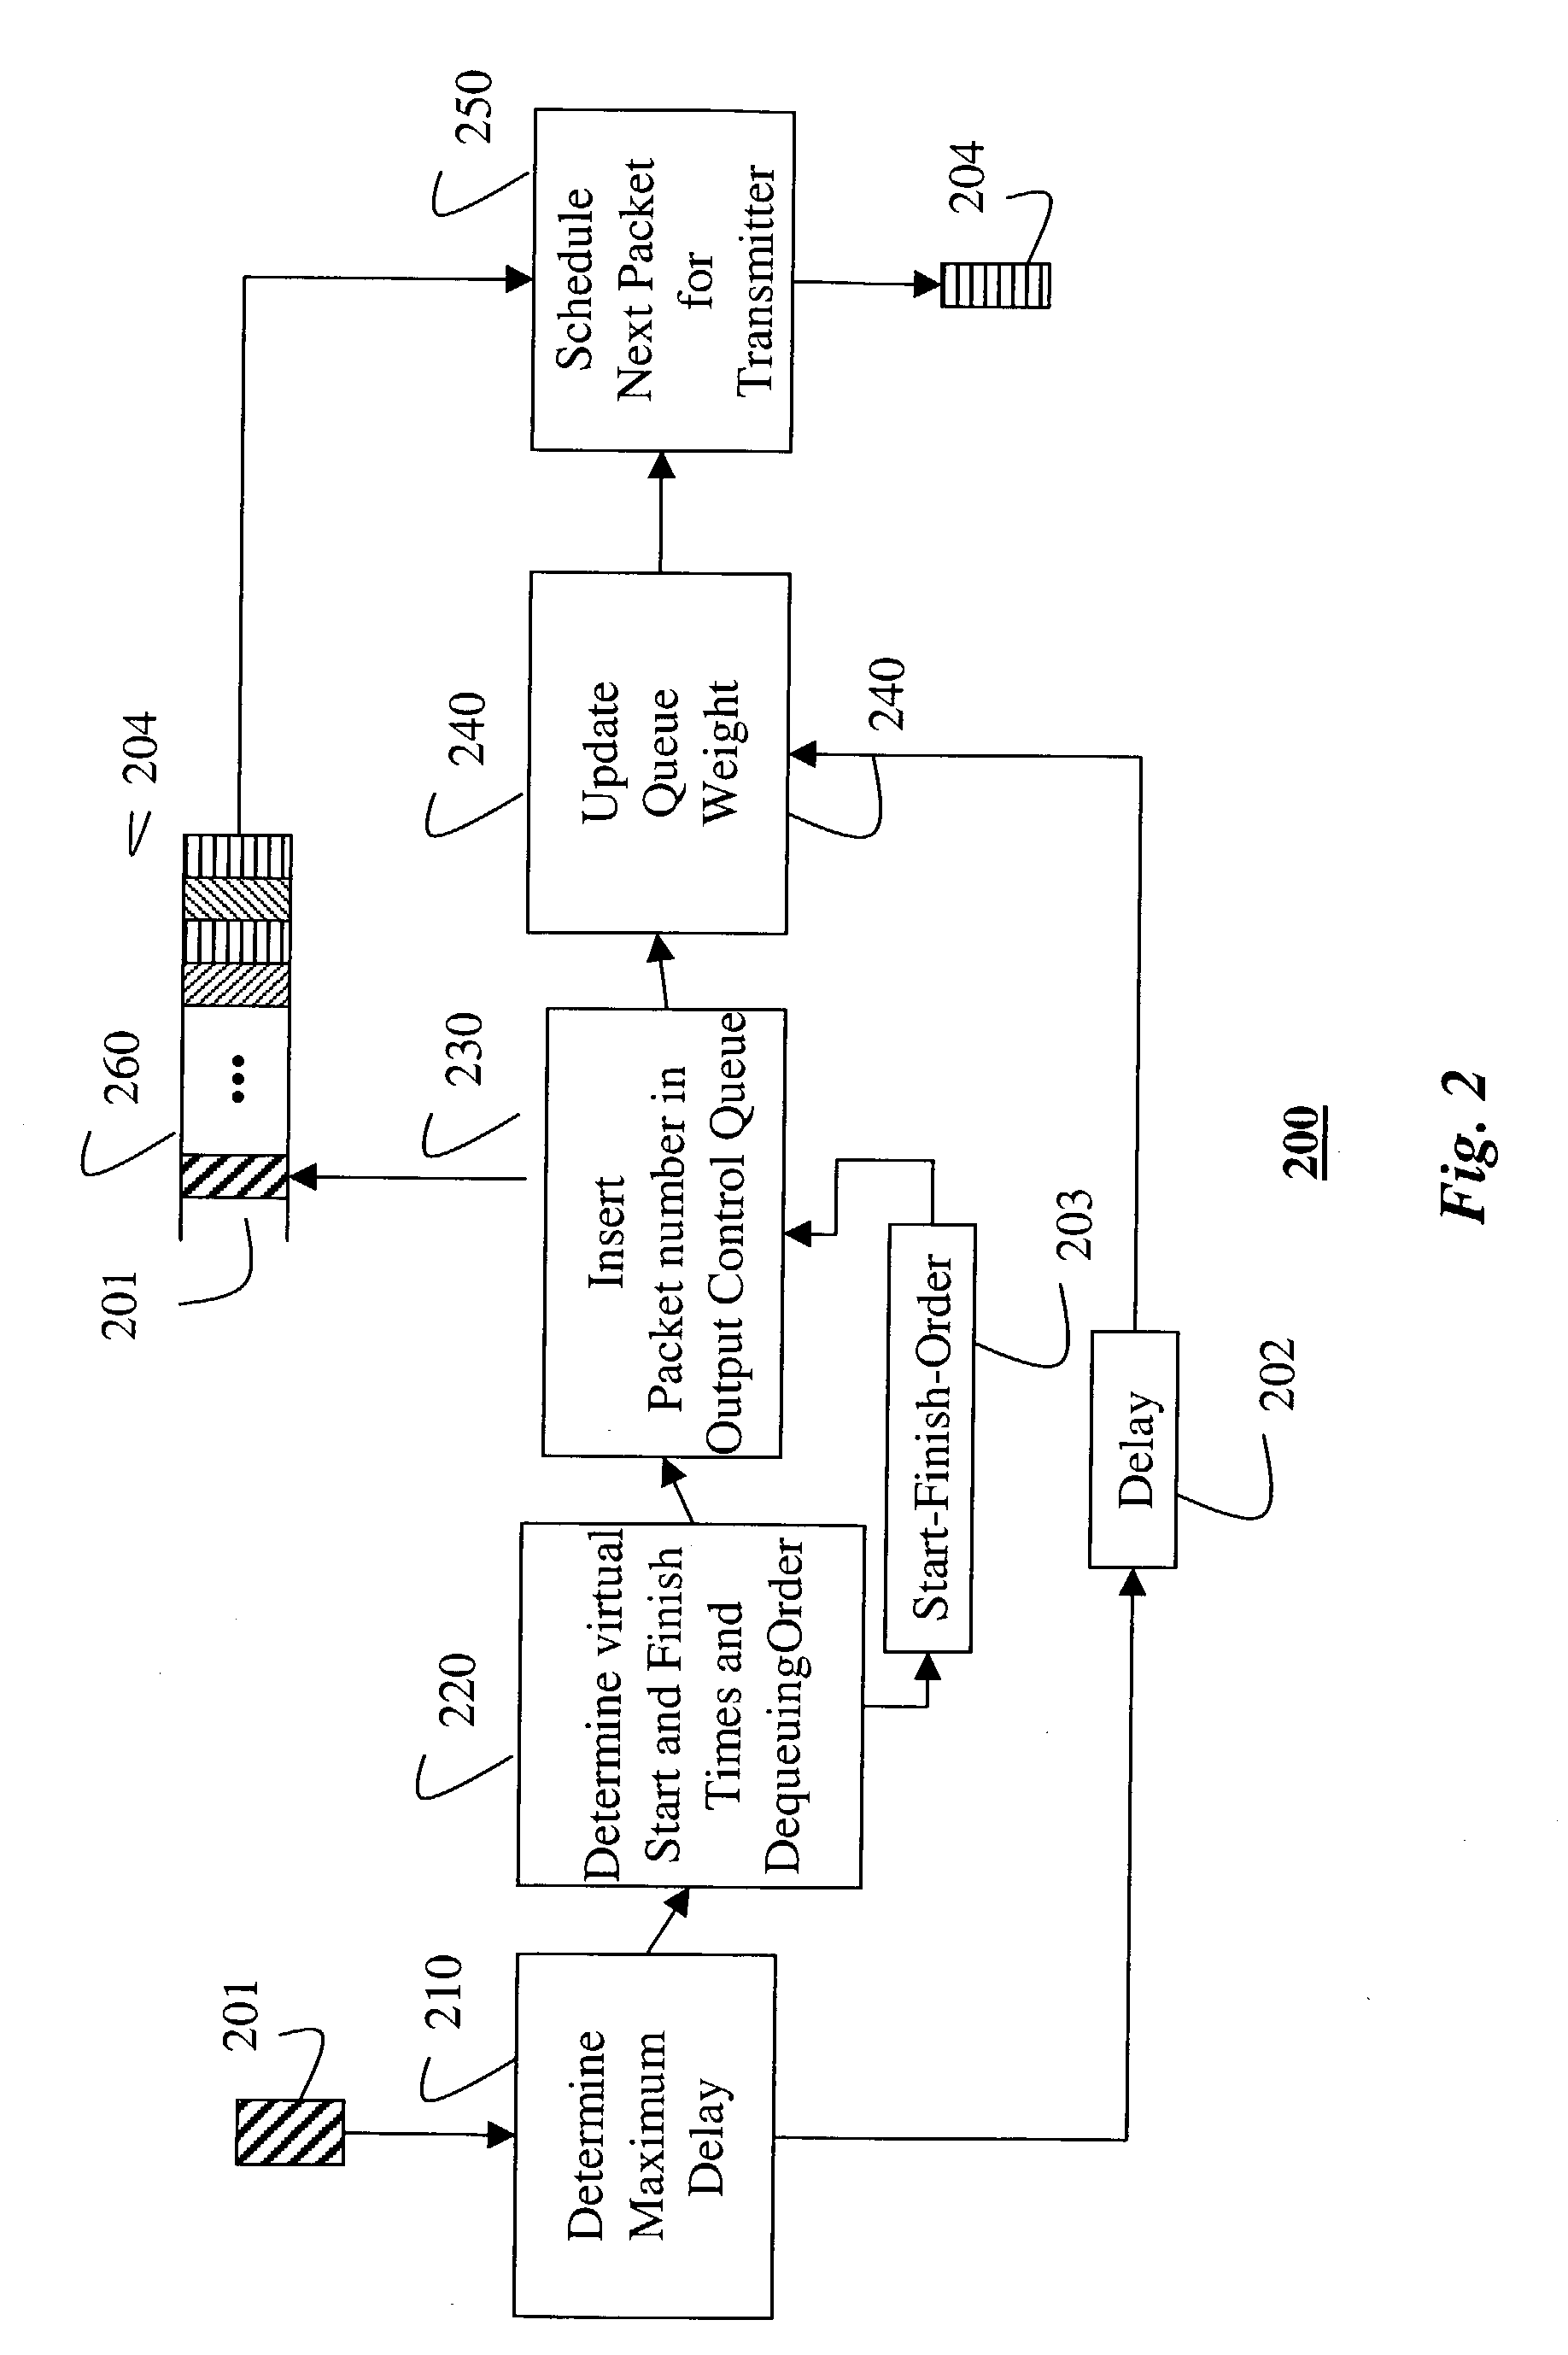 Dynamic resource control for high-speed downlink packet access wireless channels